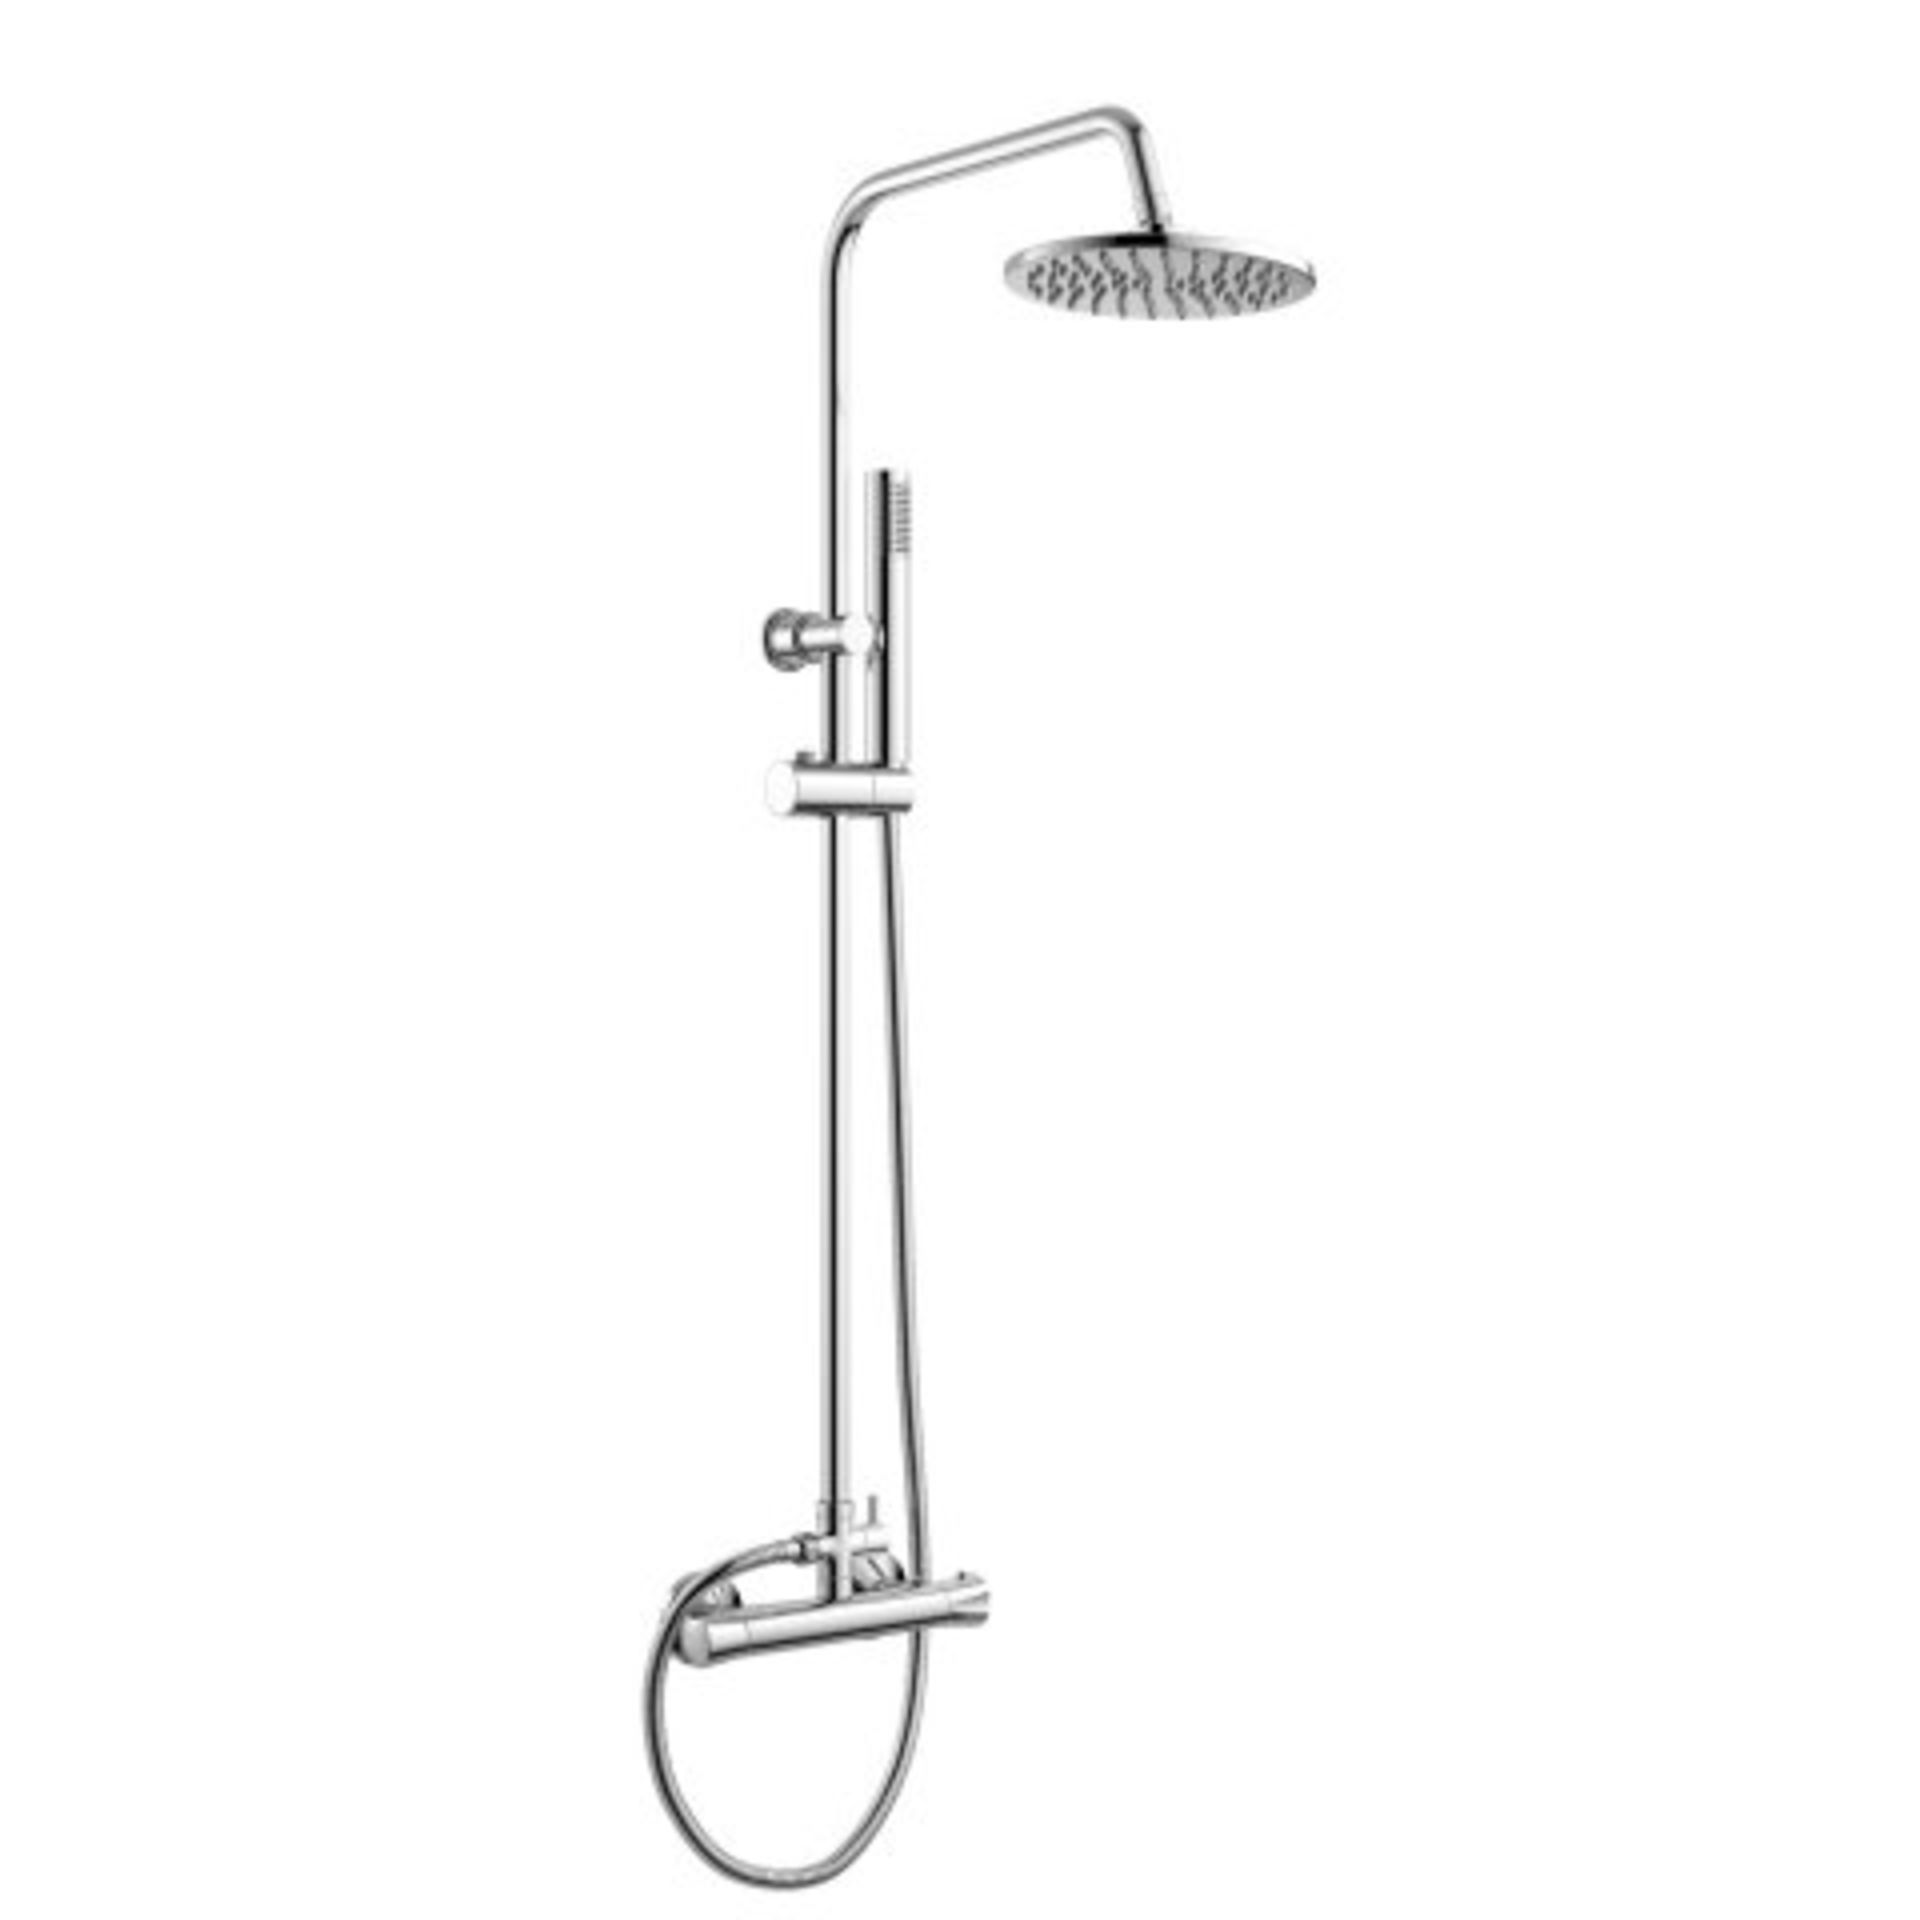 (P21) 200mm Round Head Thermostatic Exposed Shower Kit & Hand Held. RRP £249.99. Simplistic Style - Image 4 of 5